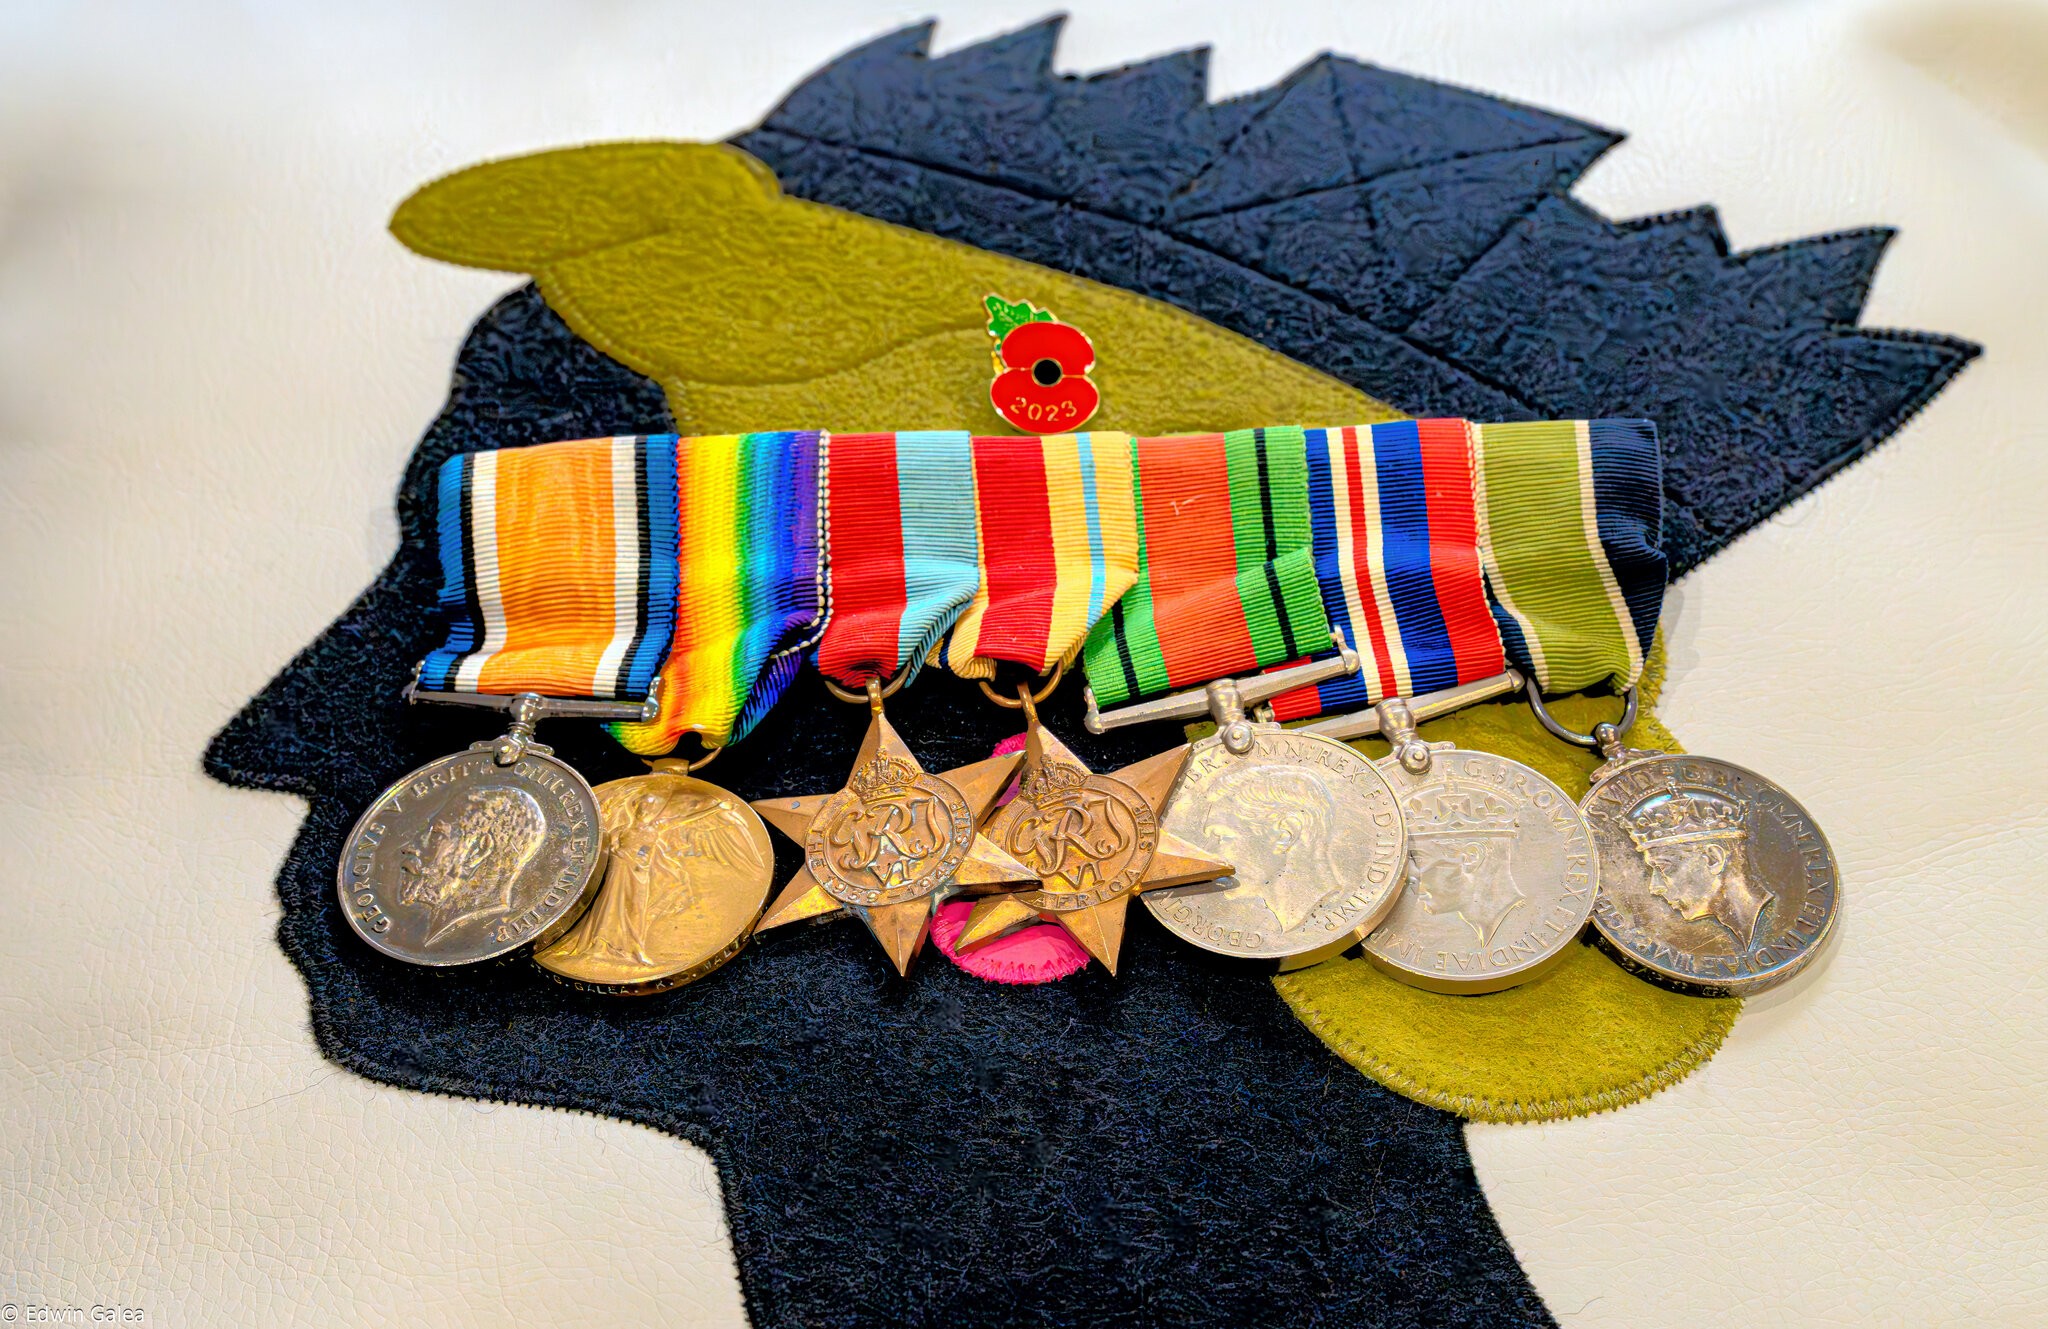 granddads_medals_front_pillow_hdr-4.jpg